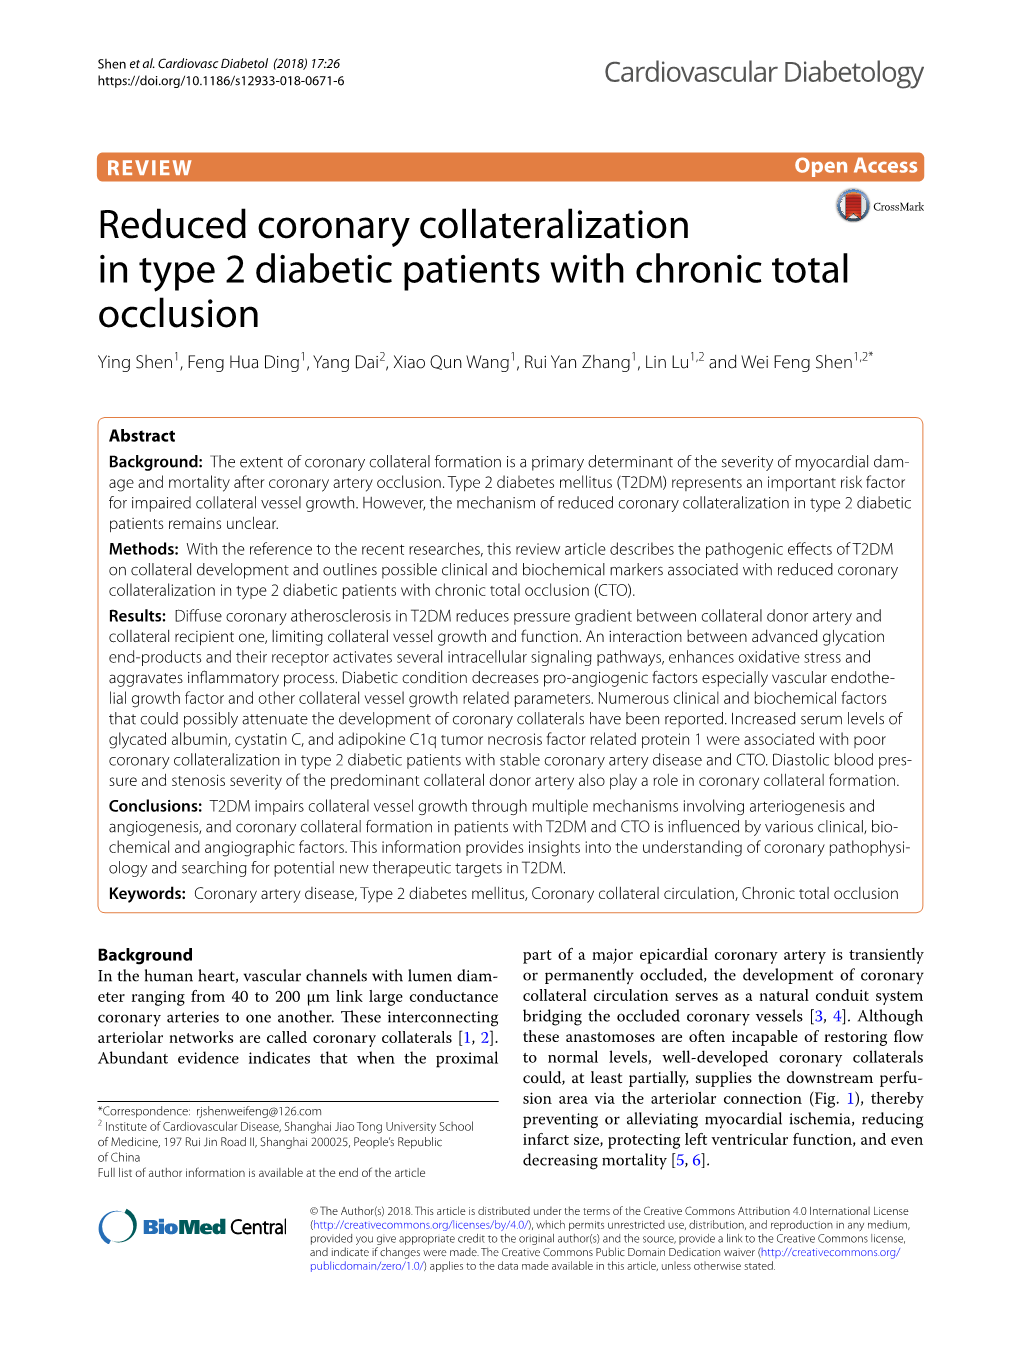 Reduced Coronary Collateralization in Type 2 Diabetic Patients with Chronic